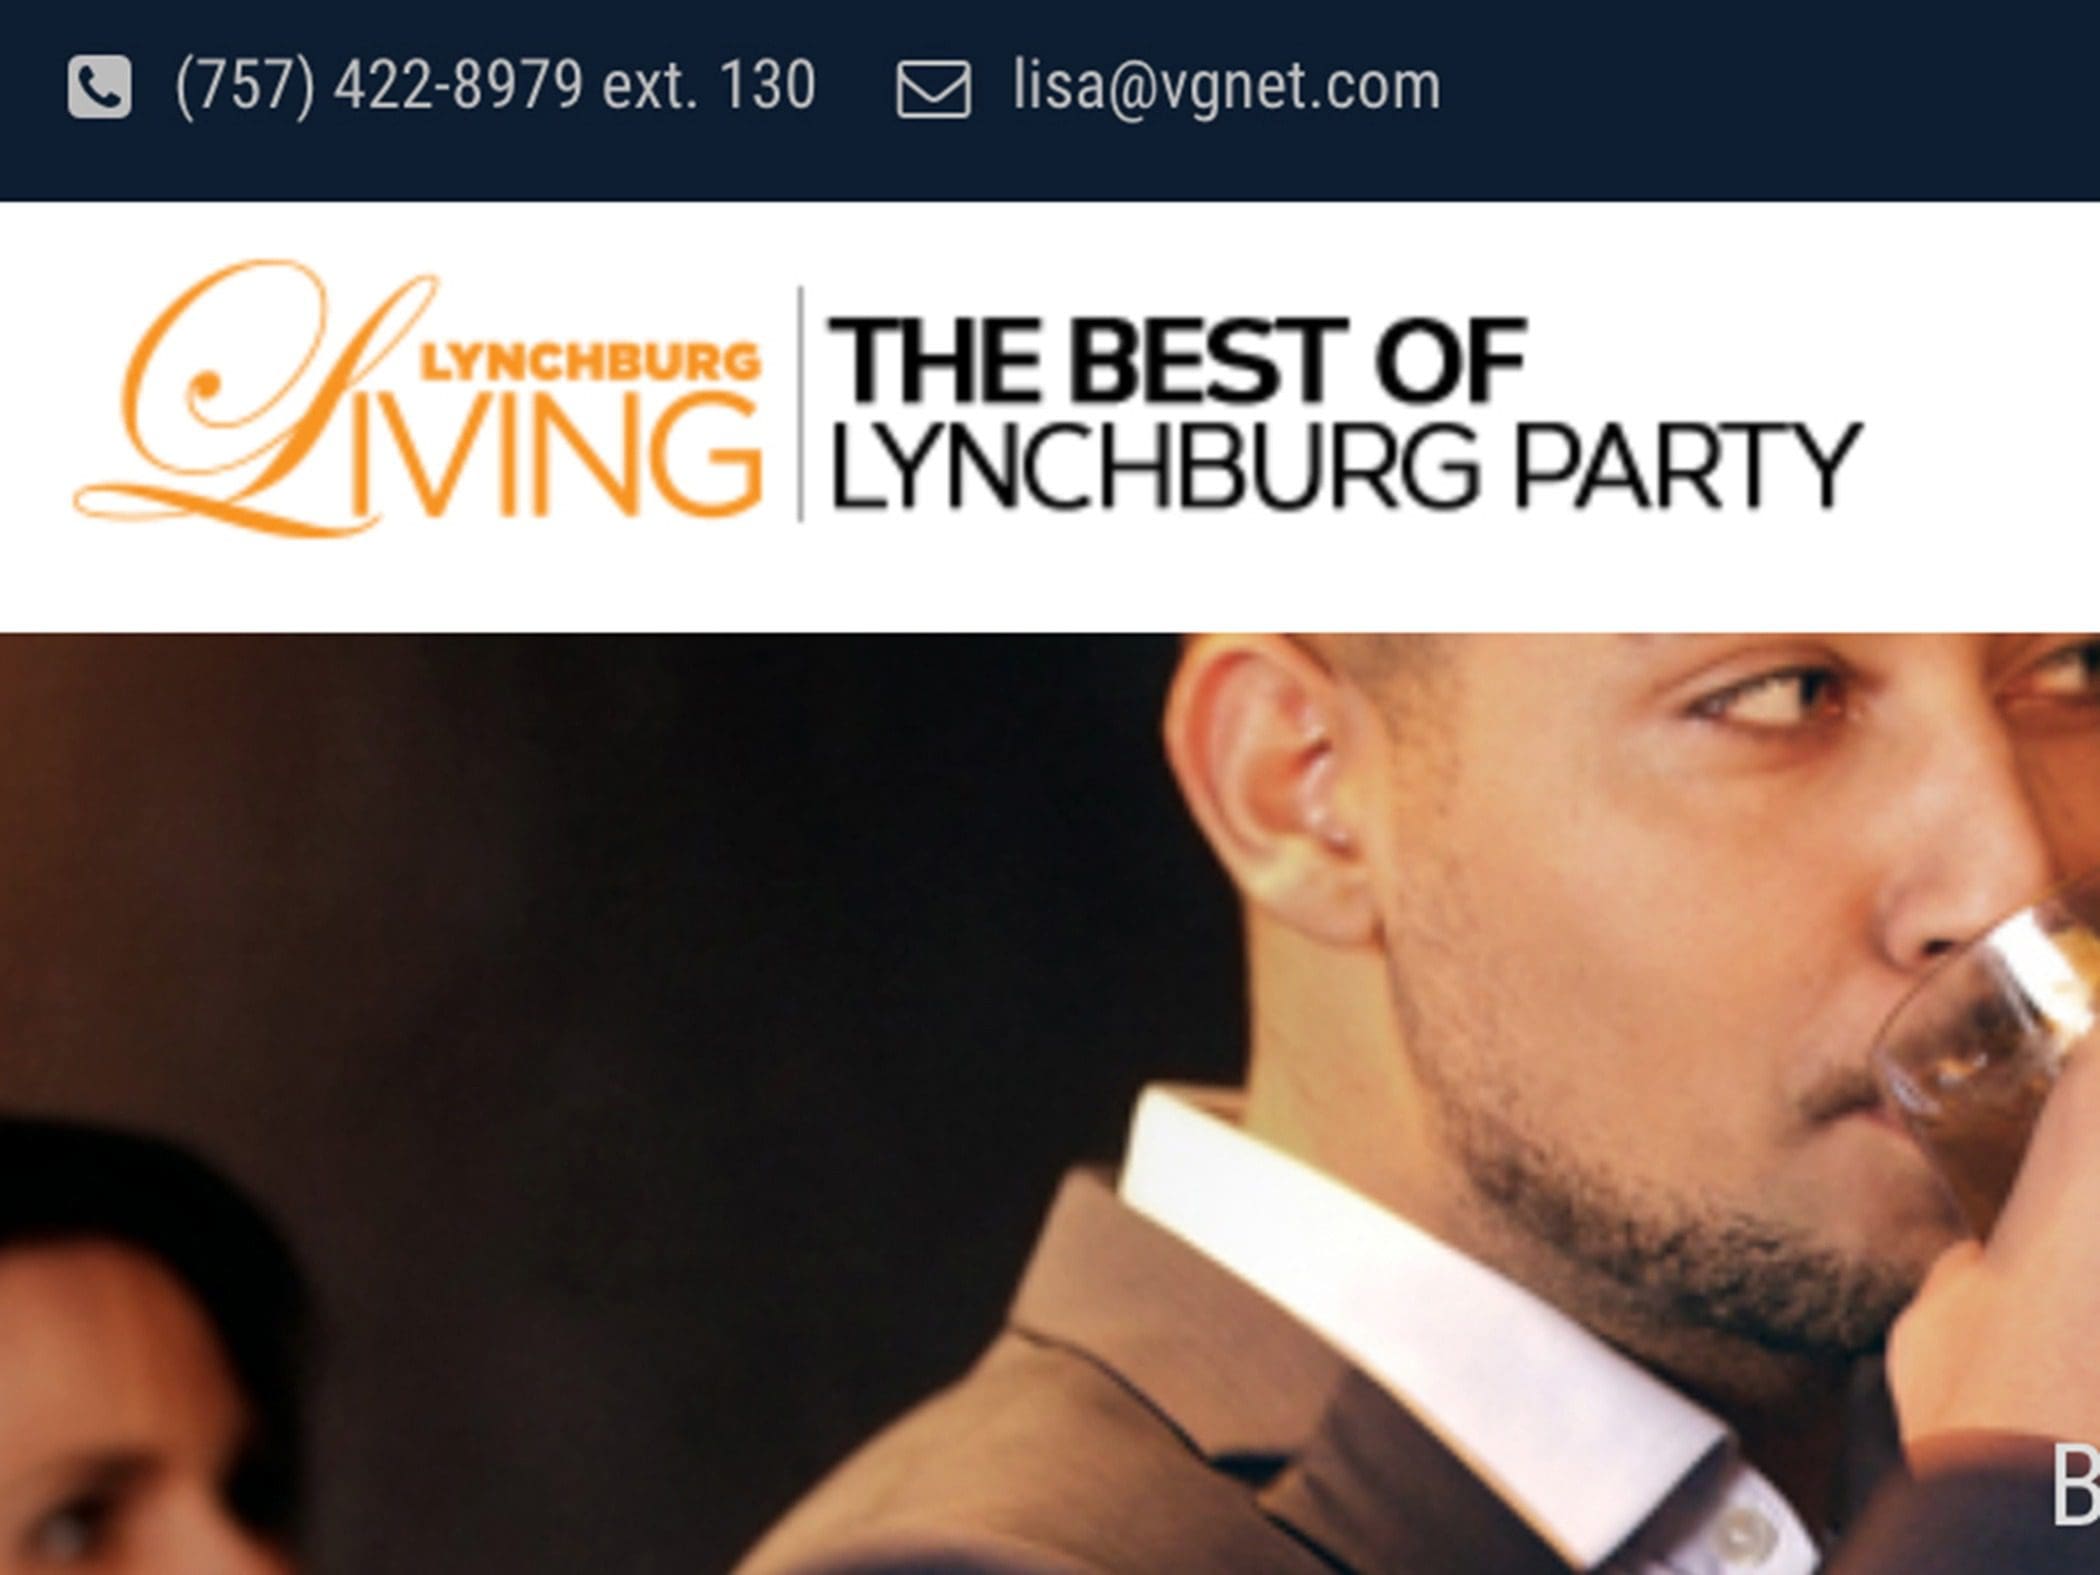 lynchburg best of party